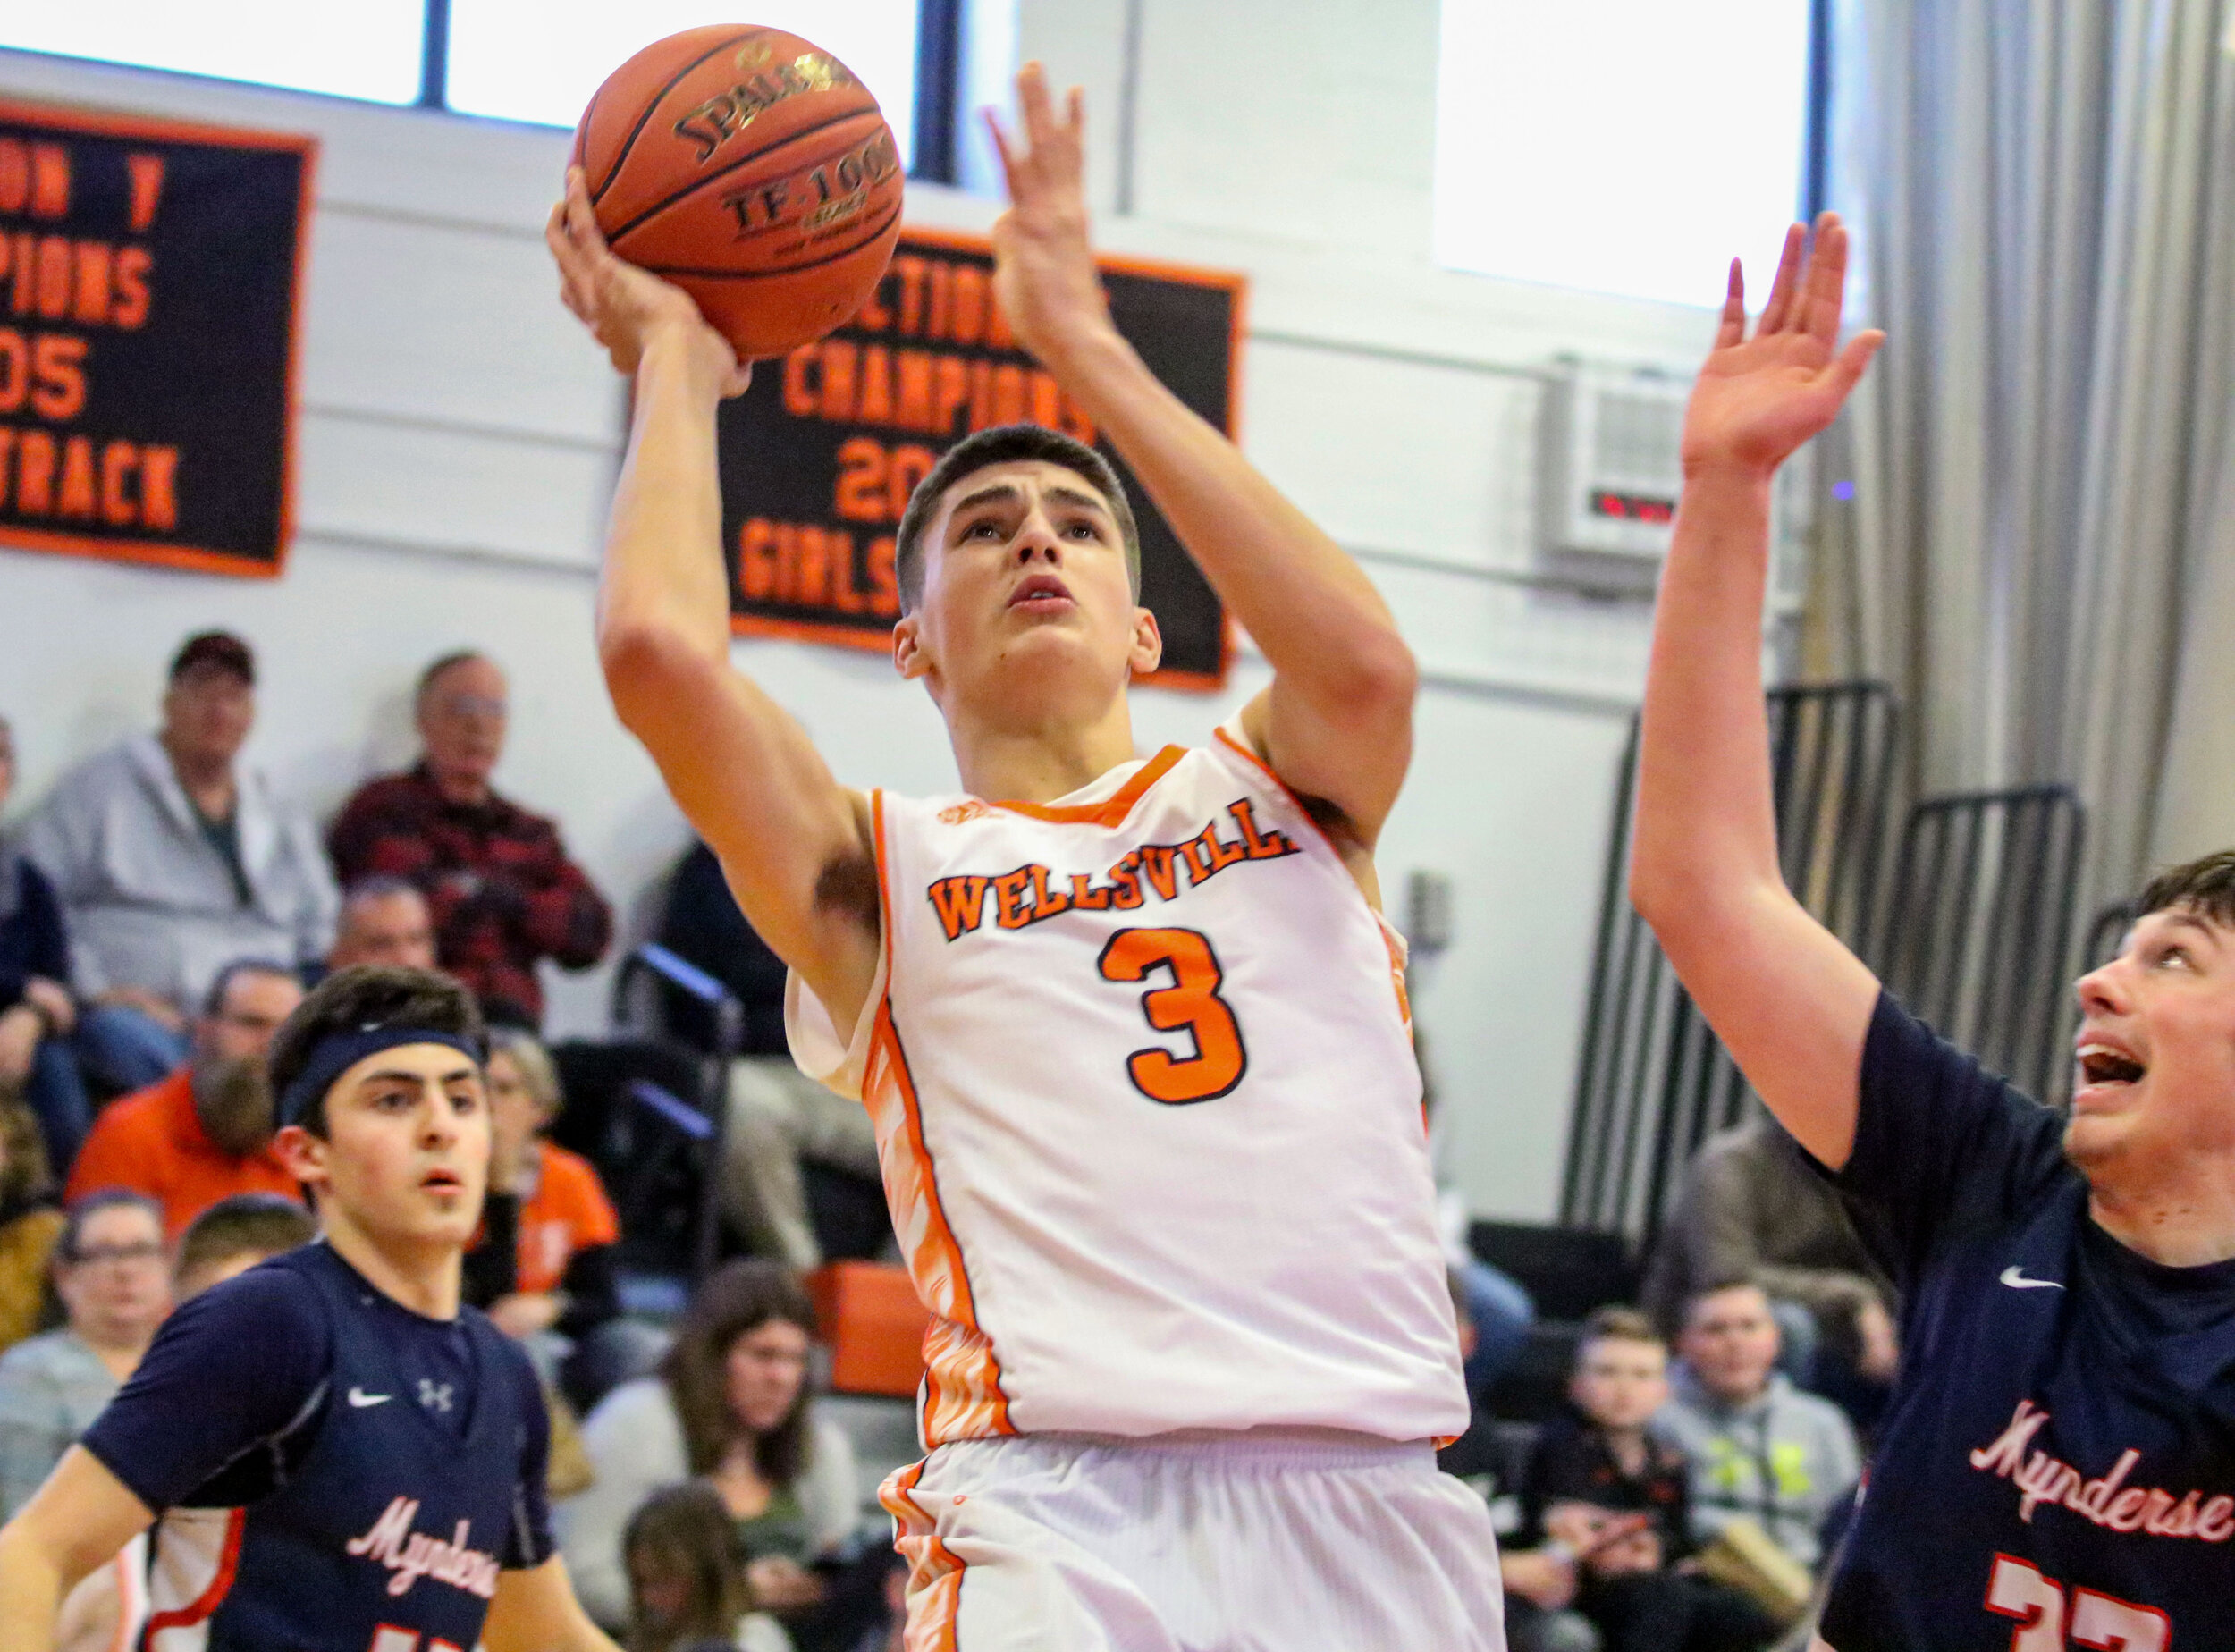  Wellsville senior Max Jusianiec (3) provides an off-balanced runner to the basket, as the Mynderse defense looks to contest the shot during Saturday afternoon’s Class B2 Quarterfinal matchup in Wellsville. [Chris Brooks/WellsvilleSports.com] 